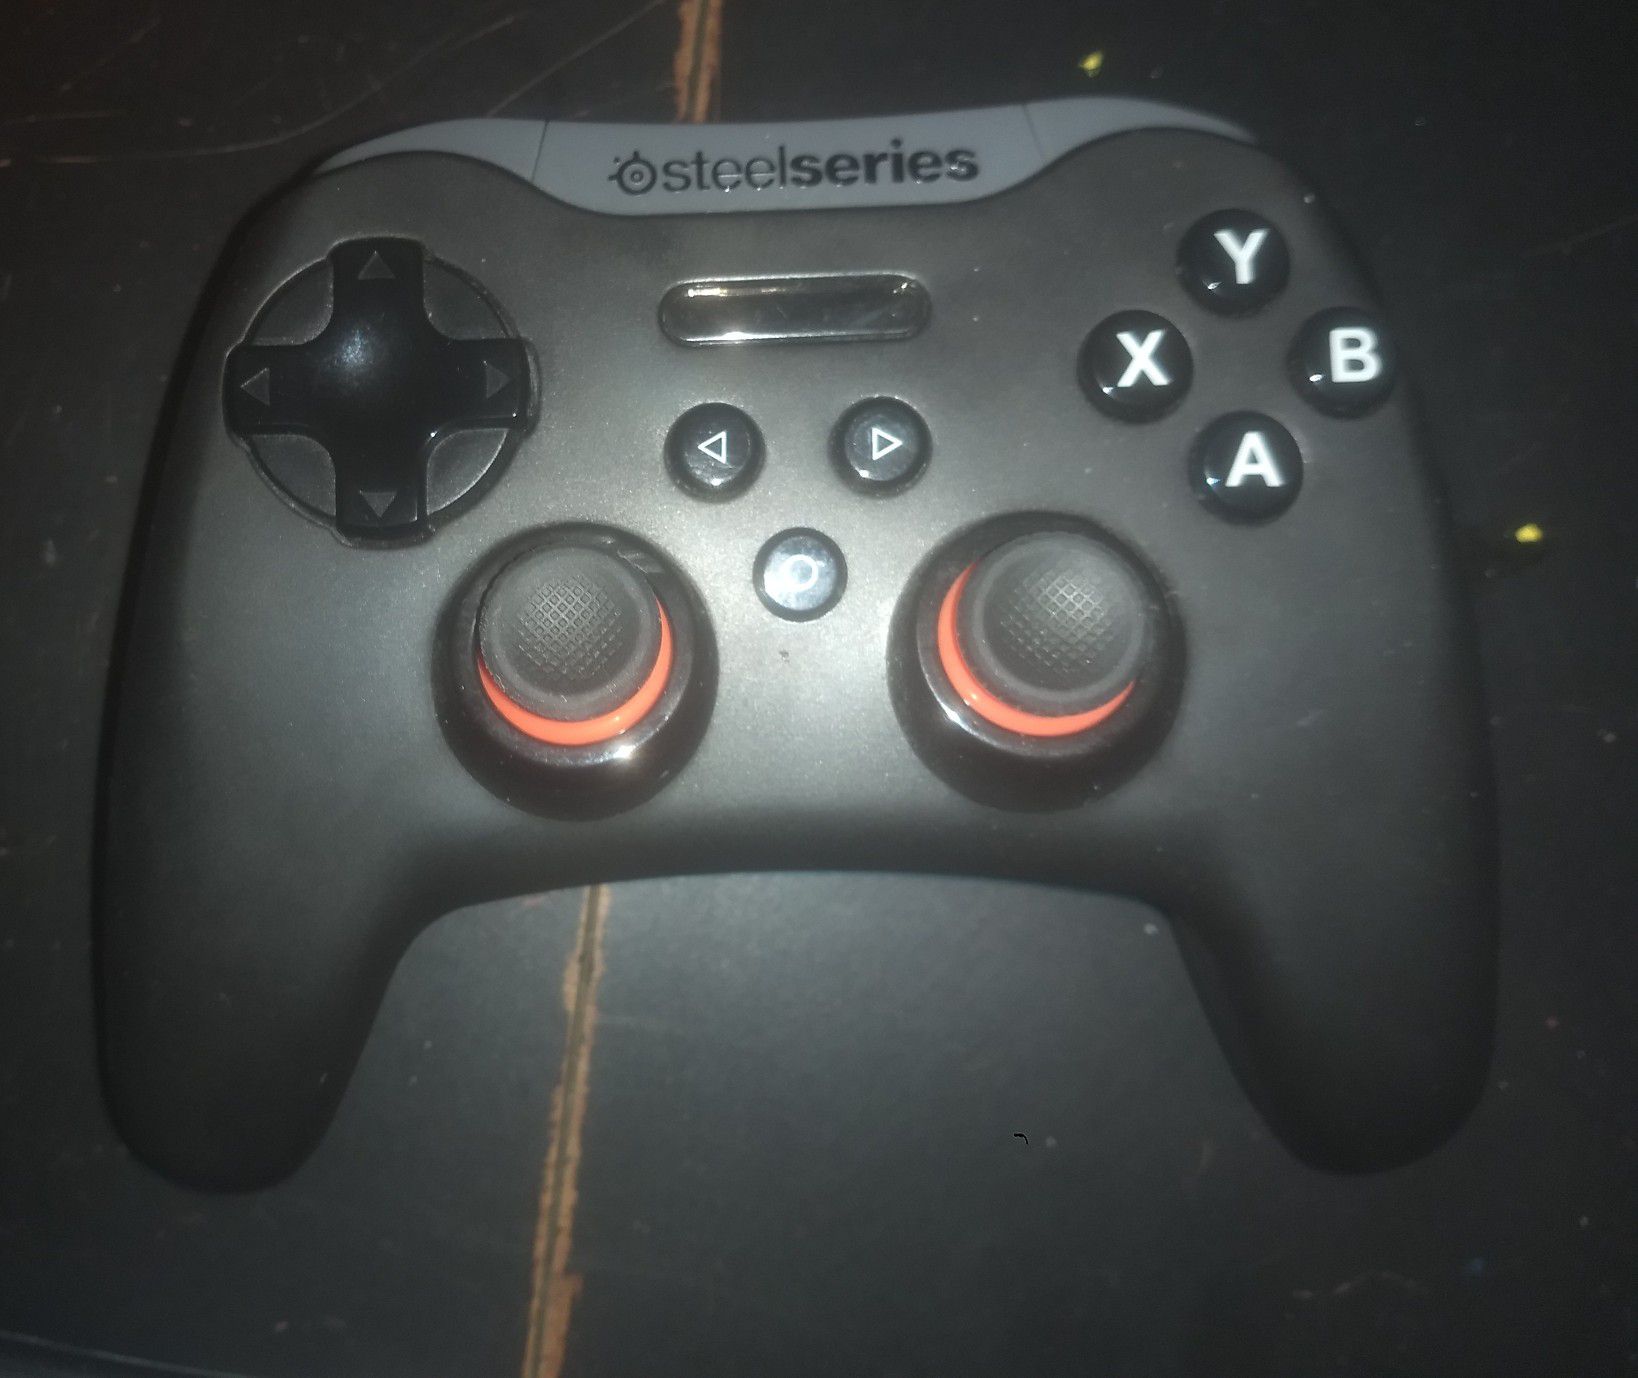 SteelSeries Stratus XL, Bluetooth Wireless Gaming Controller for Windows + Android, Samsung Gear